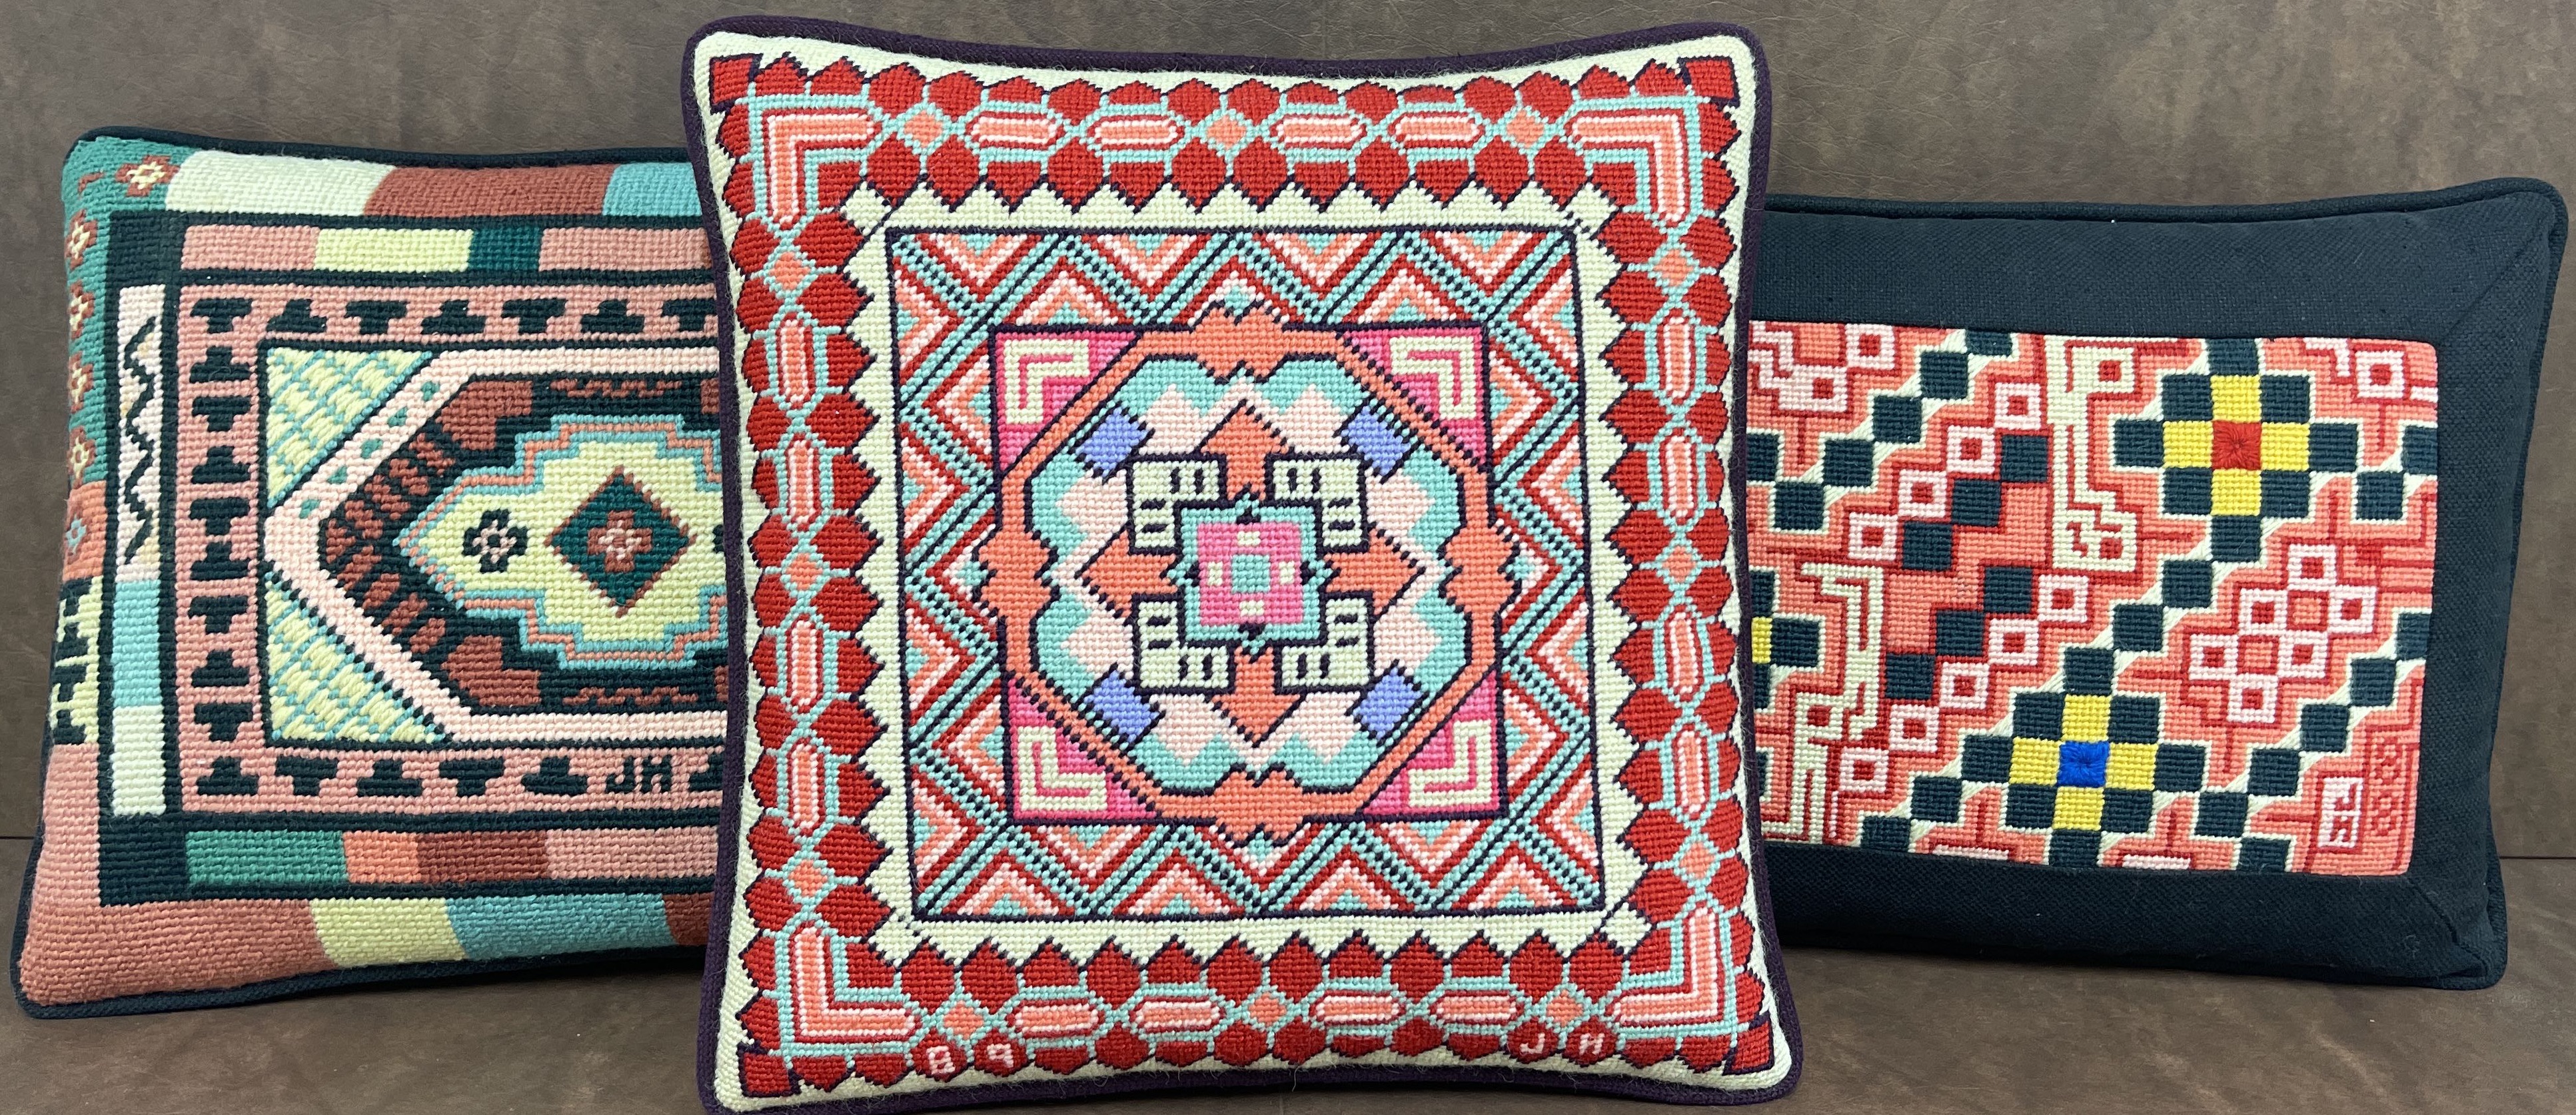 Accents, Antique Needlepoint Pillows